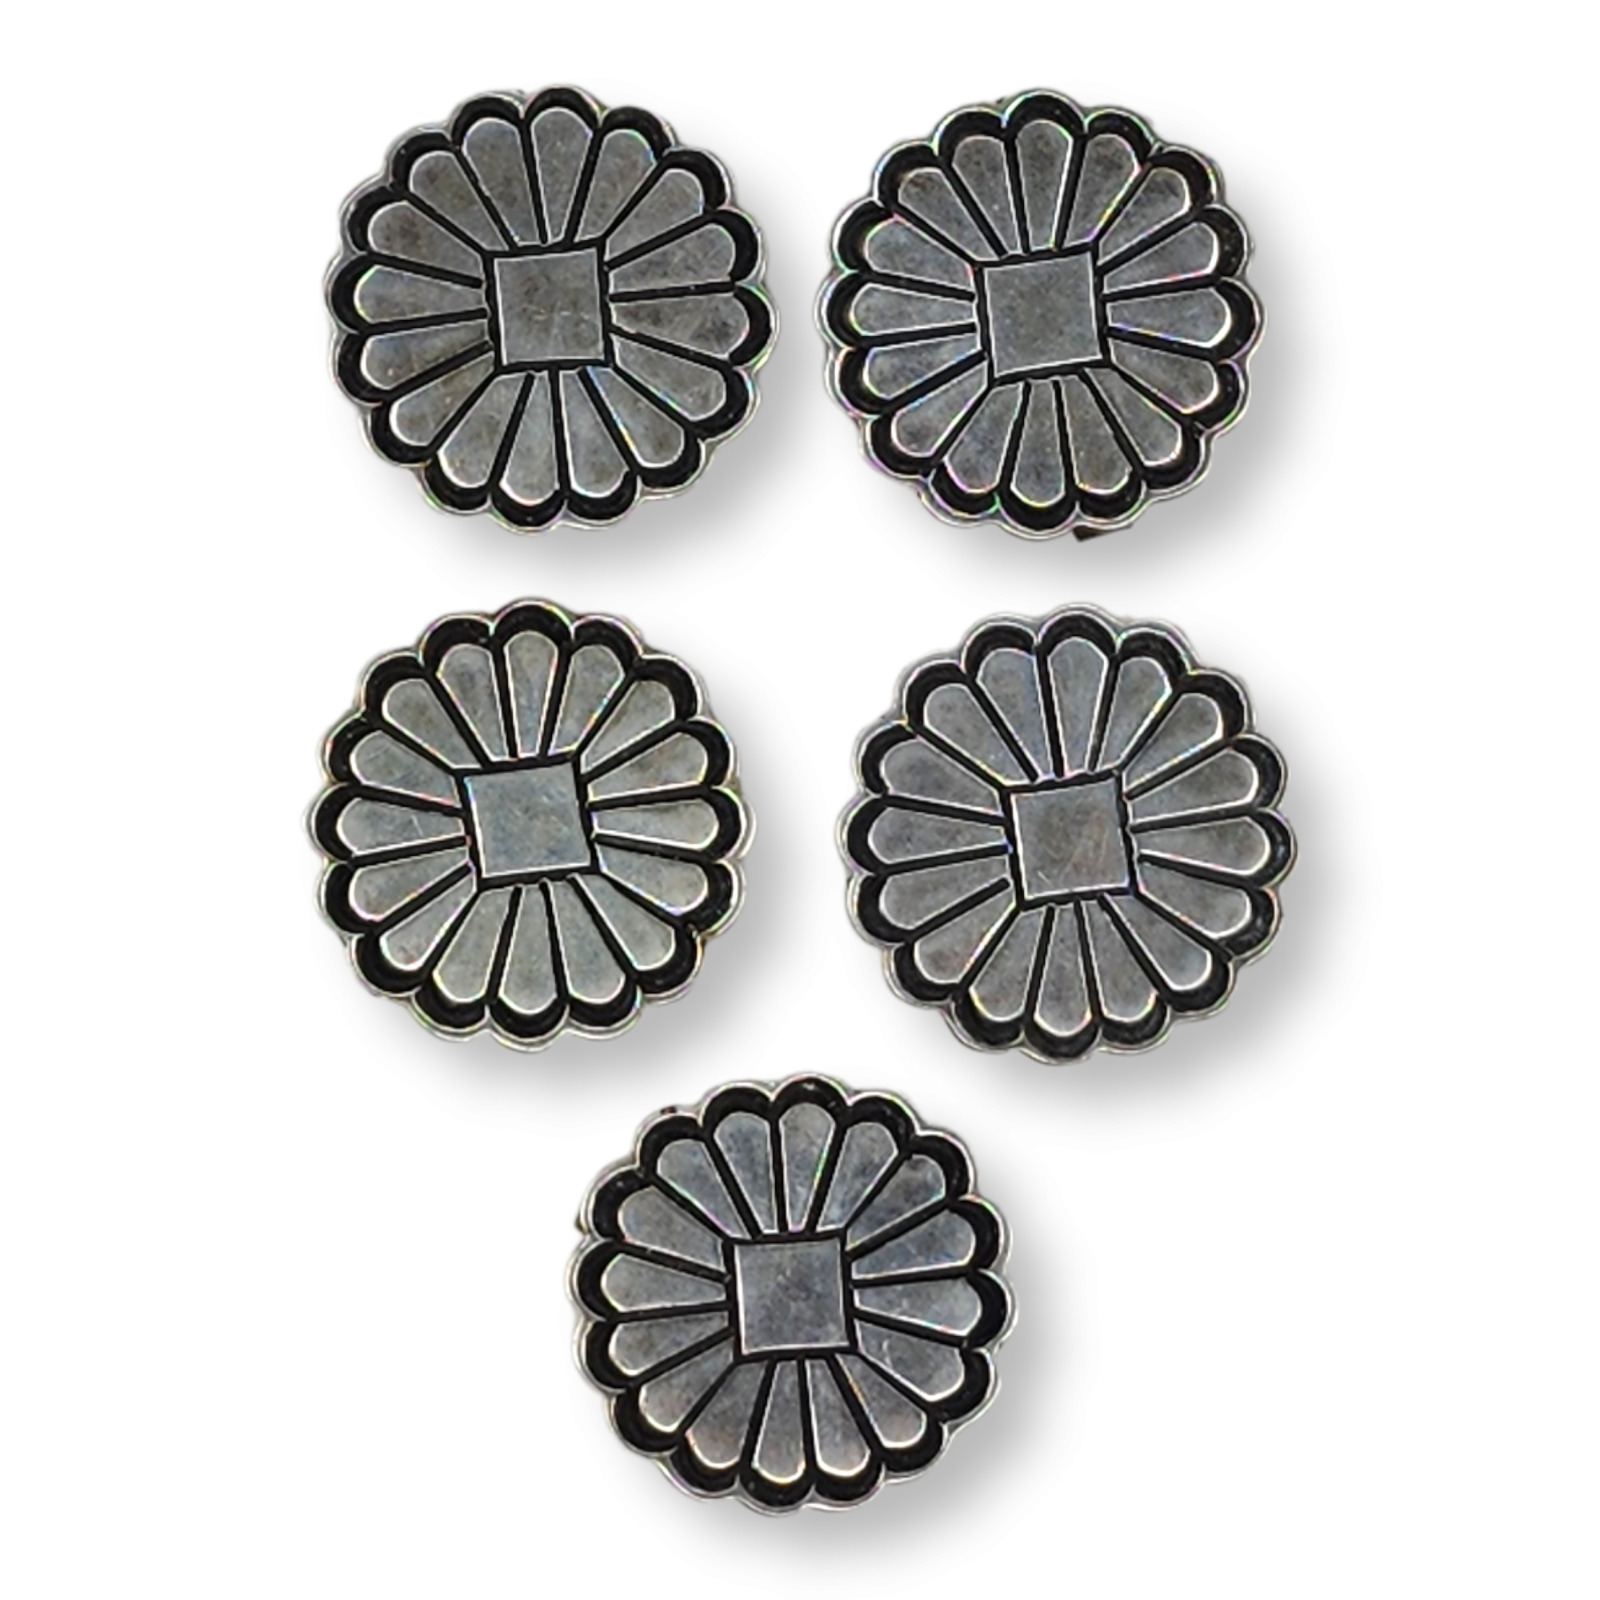 Southwestern Vintage Set of 5 Sterling Silver 925 Flower Button Covers